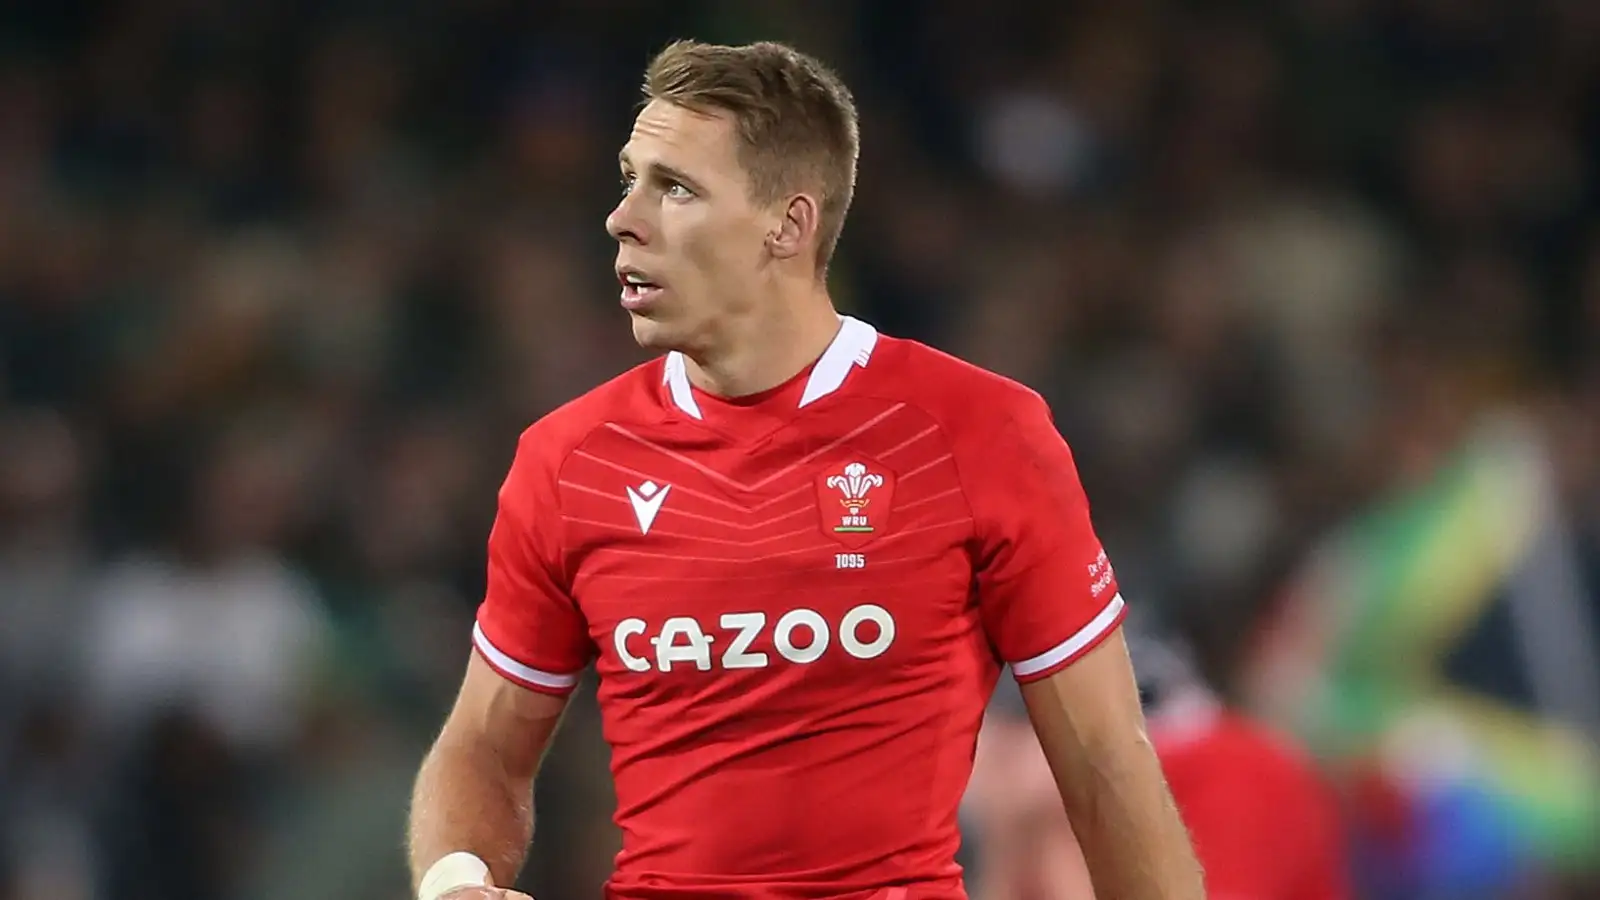 Liam Williams returns from injury for Cardiff this weekend in the United Rugby Championship, providing Wales head coach Warren Gatland with a timely boost ahead of the Six Nations. Leigh Halfpenny ruled out of opener